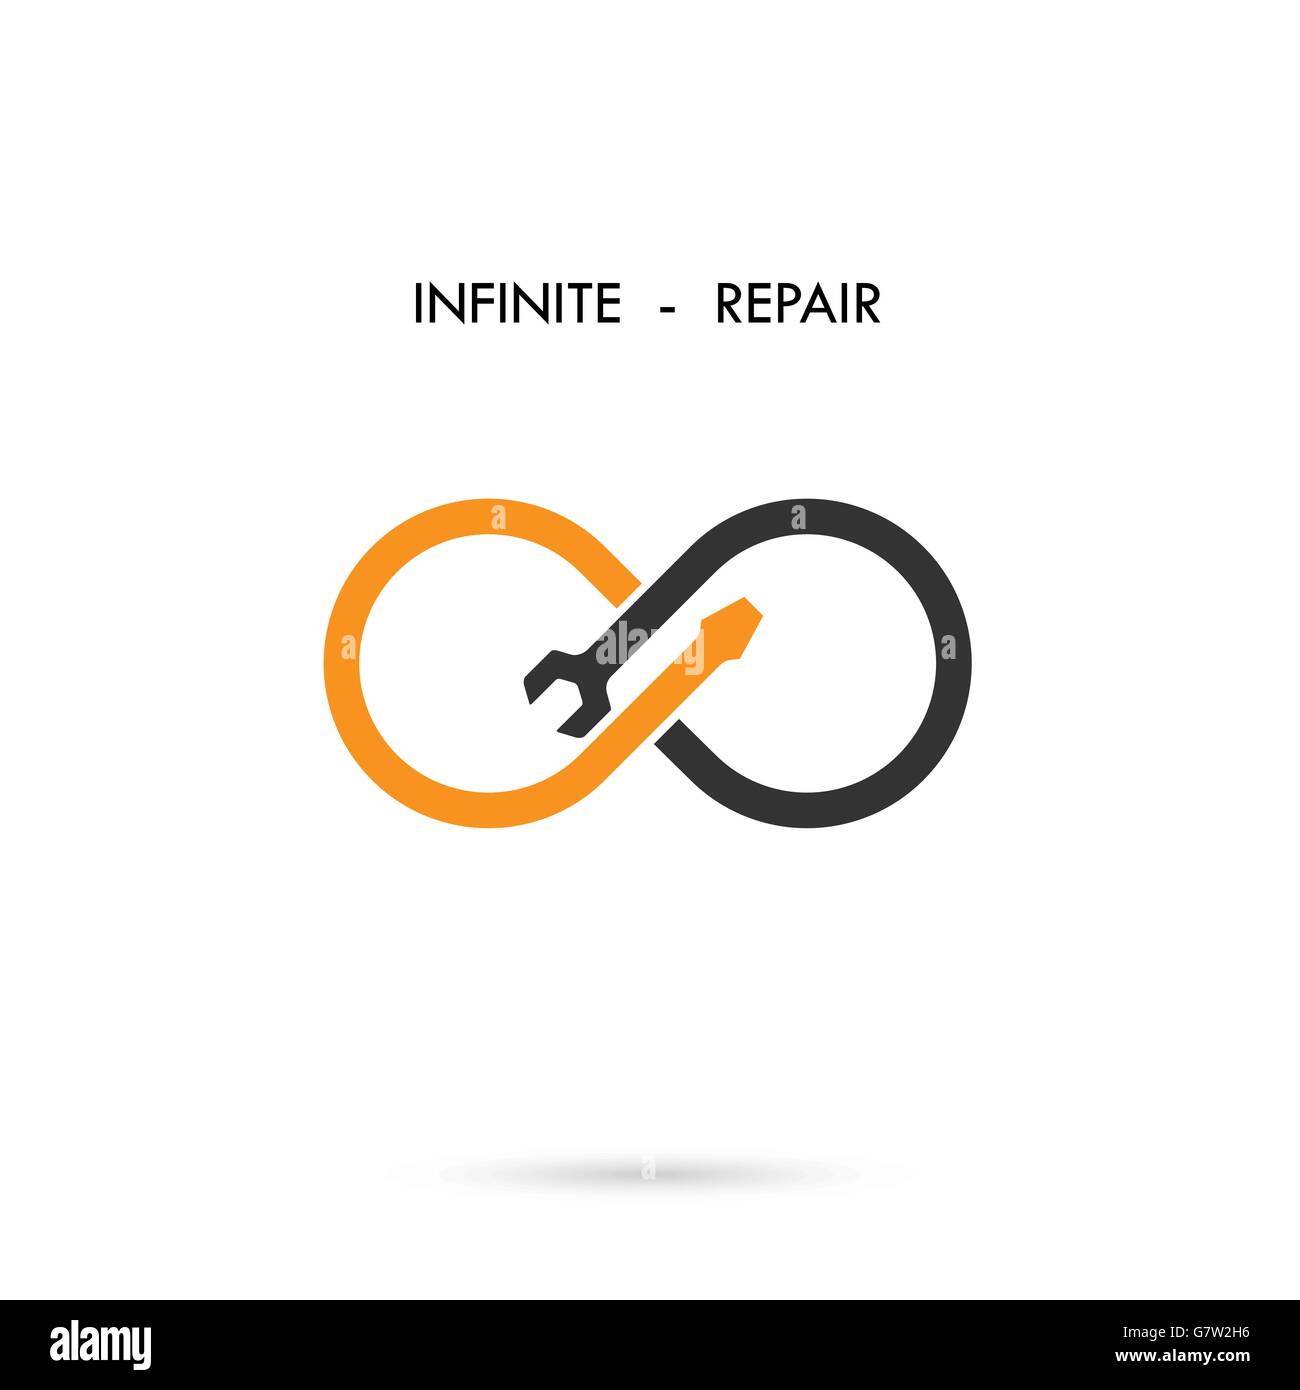 Infinite repair logo elements design.Maintenance service and engineering creative symbol.Business and industrial concept.Vector Stock Vector